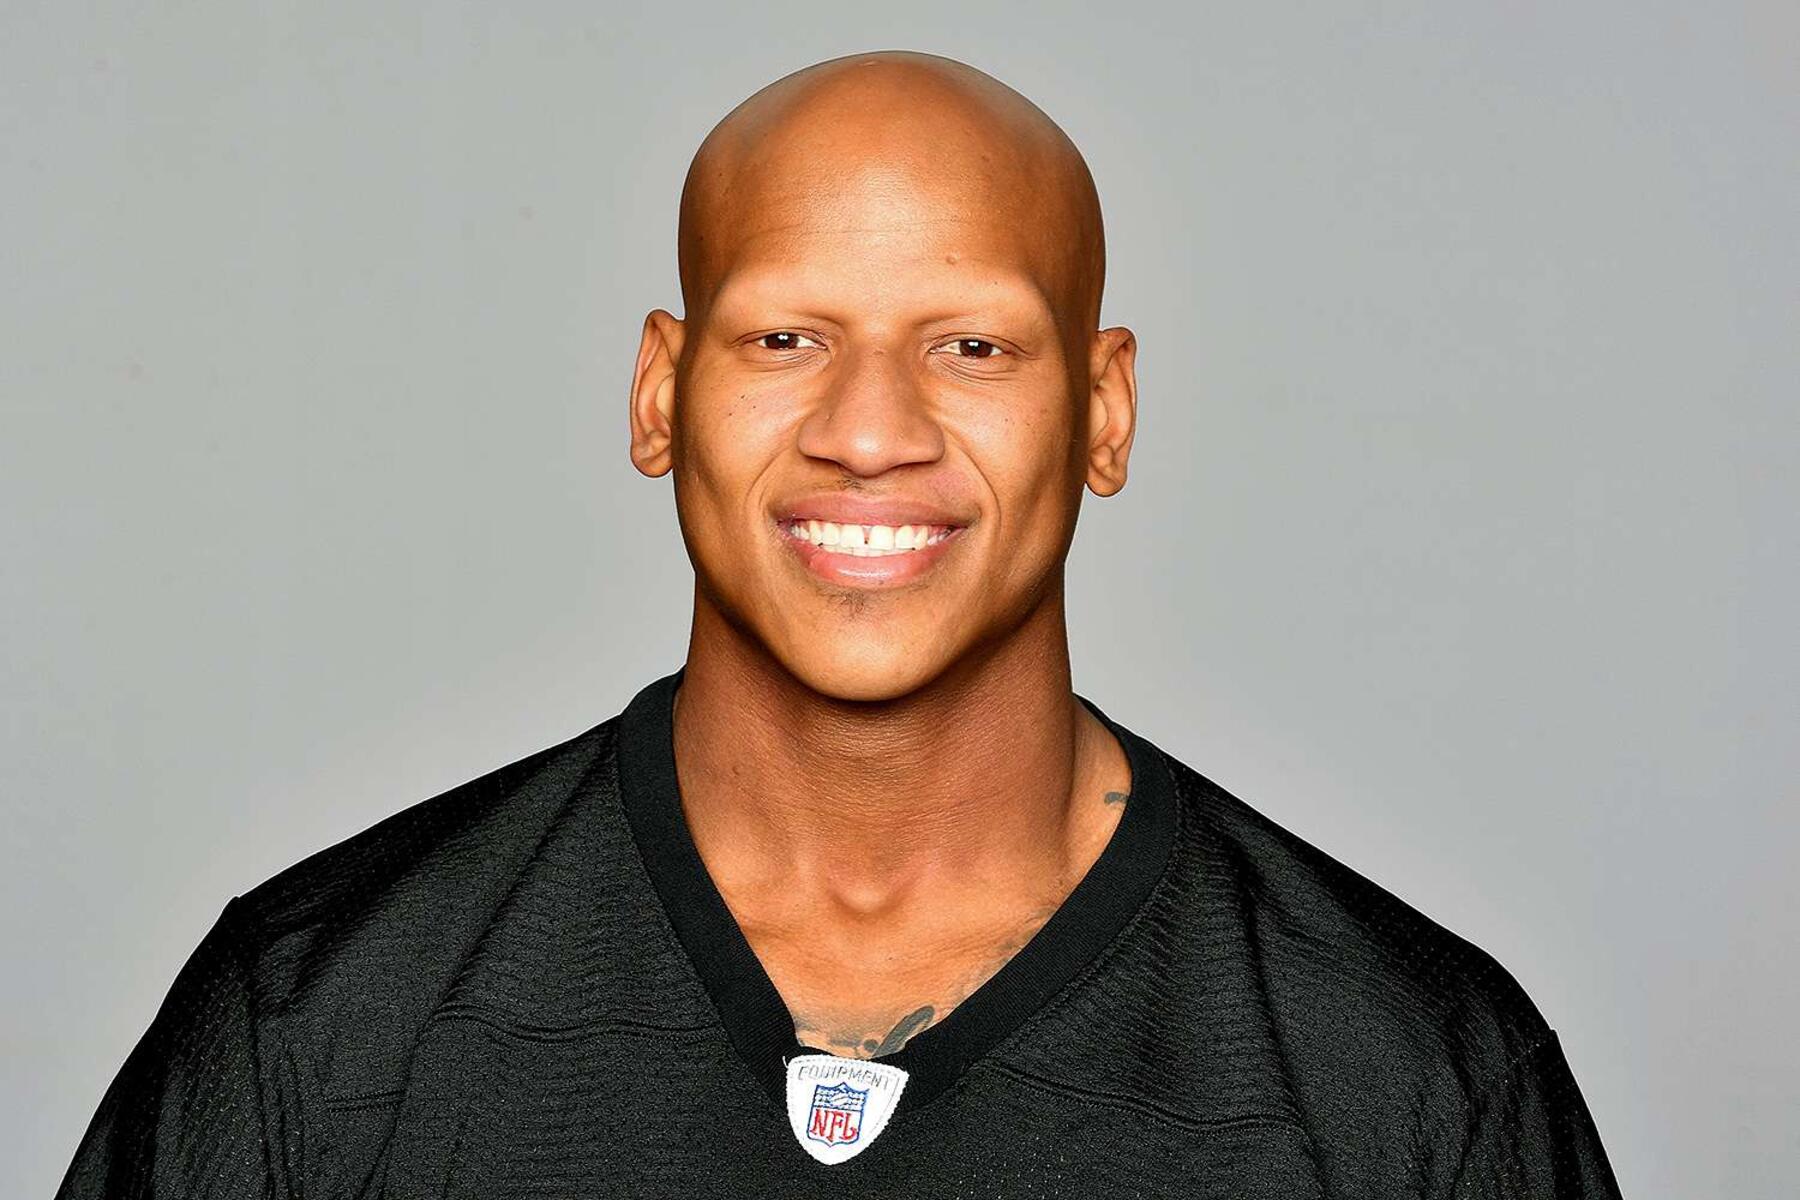 21-mind-blowing-facts-about-ryan-shazier